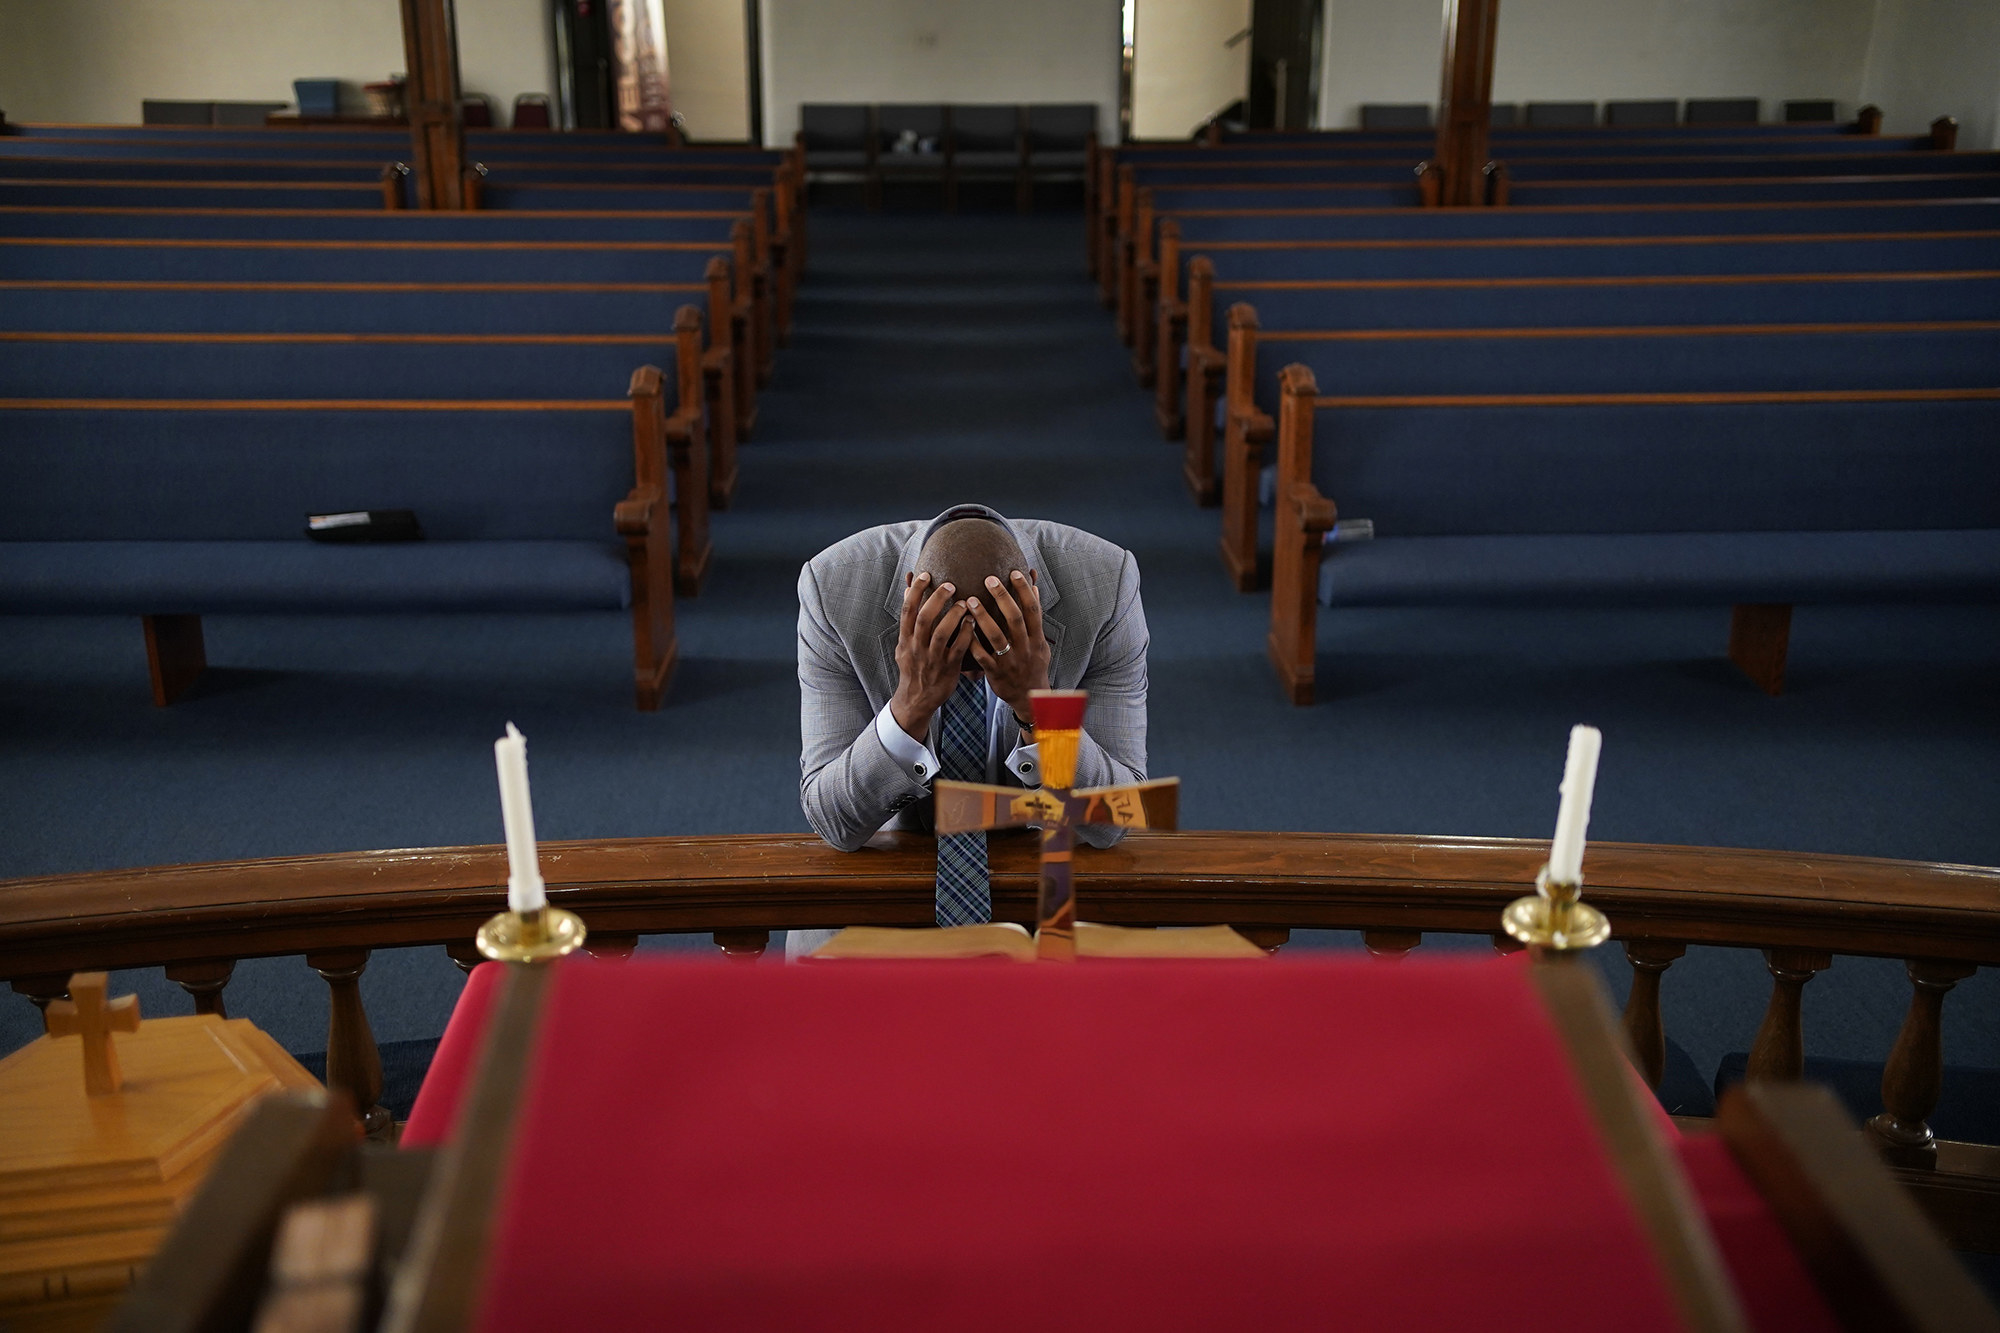 A man buries his face in his hands while kneeling at an altar